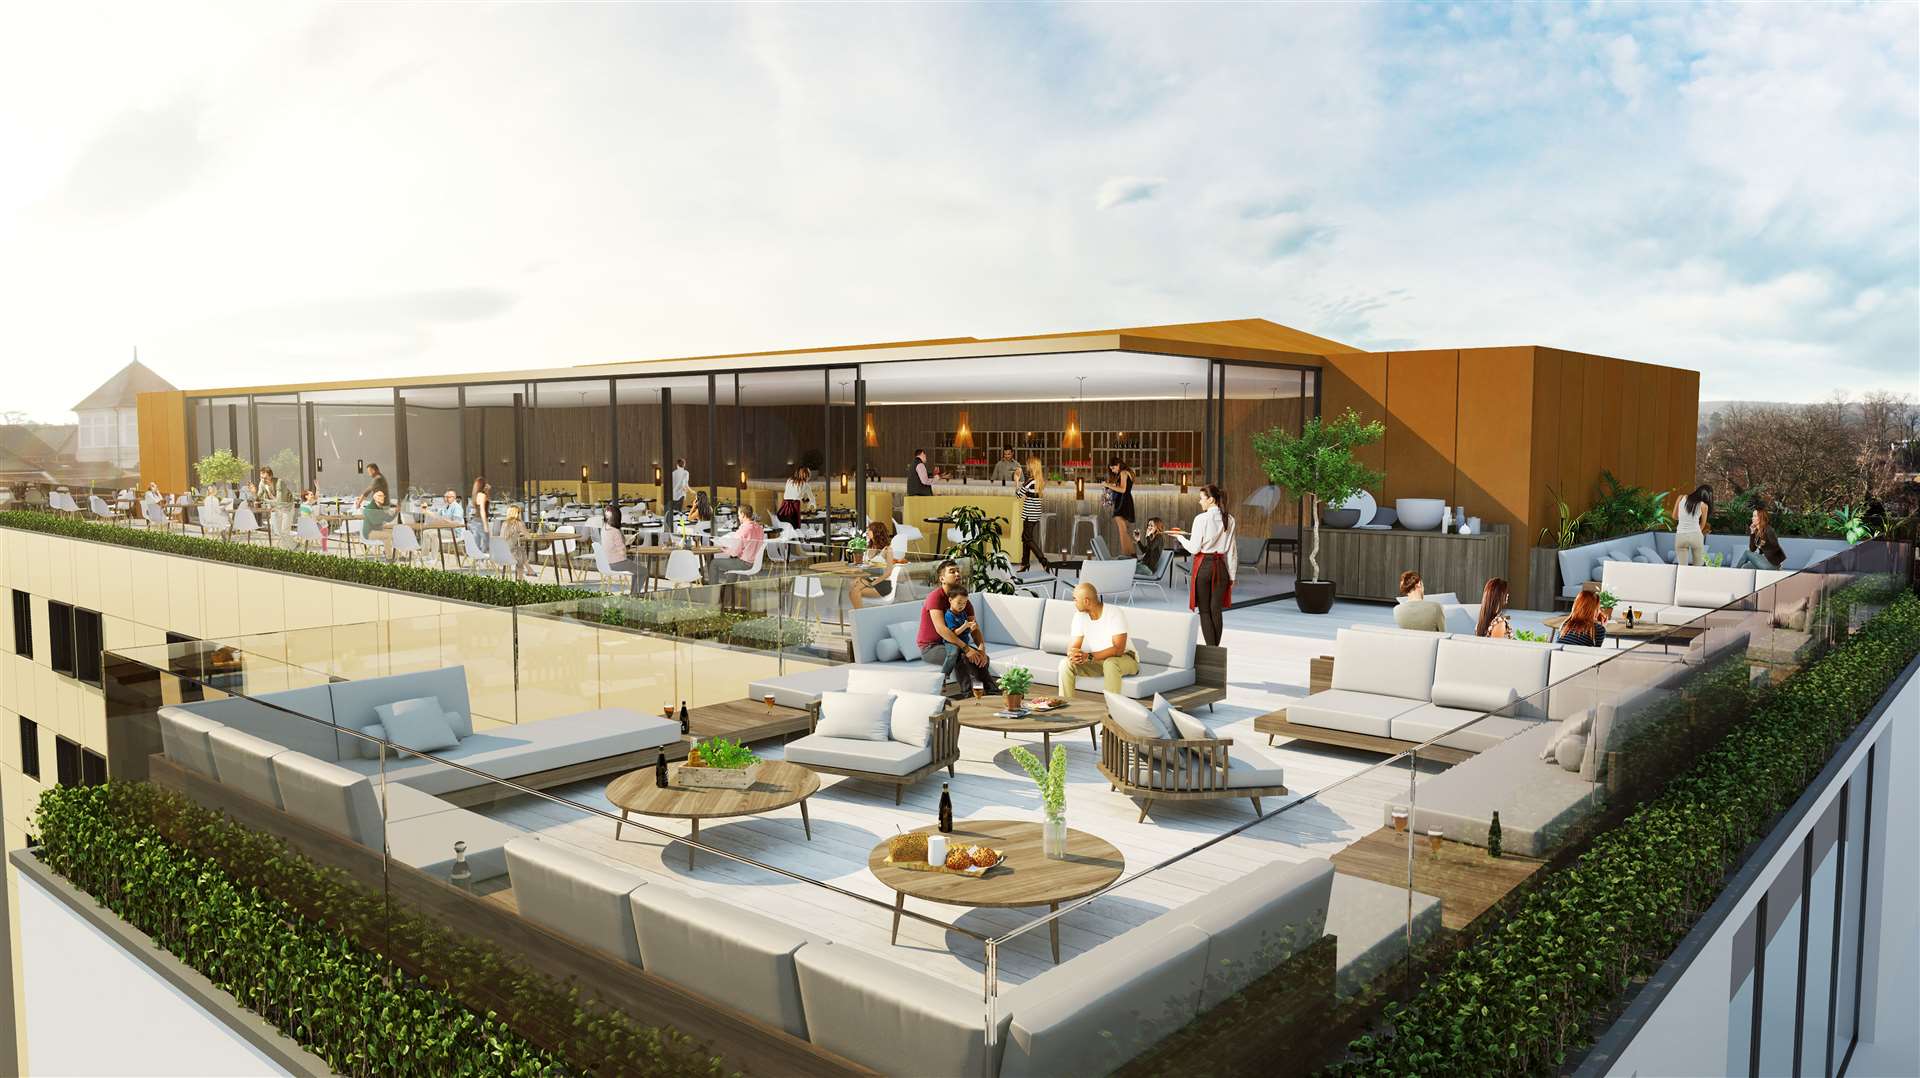 A CGI of the rooftop restaurant, for which an operator is being sought